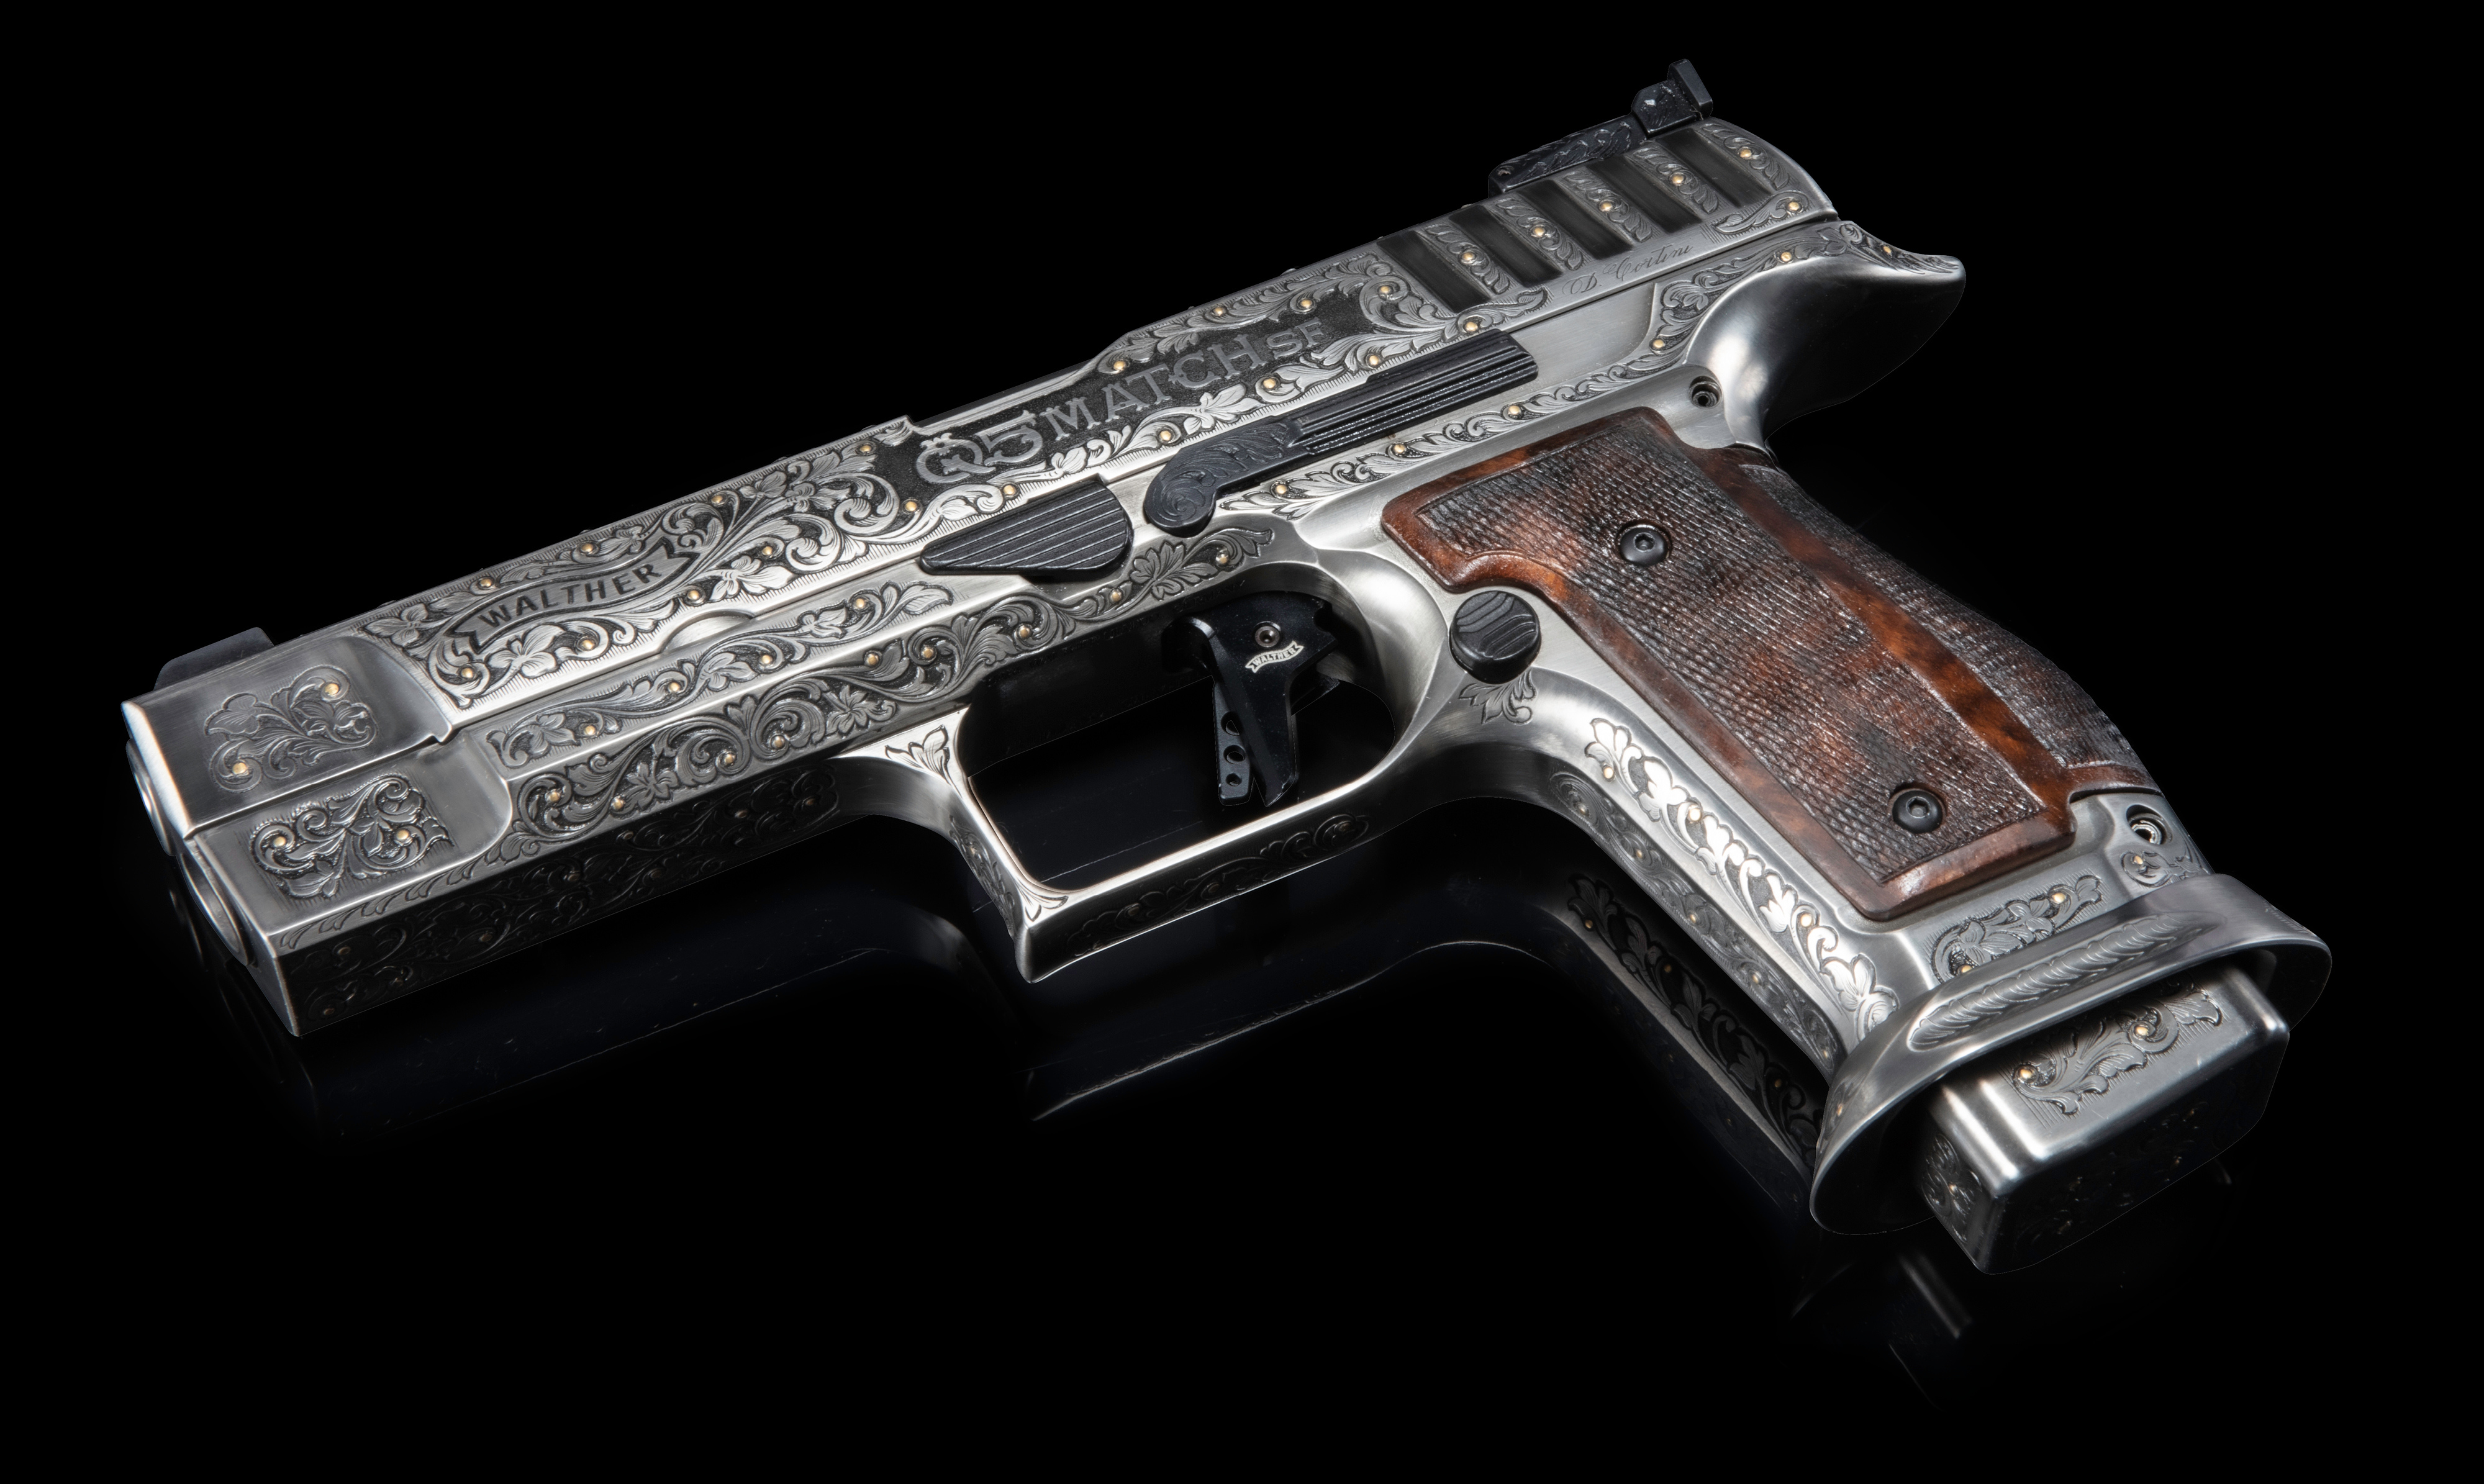 walther-meister-product-page-header-4000px-arabesque-4f20b6dd0570105535977473cf6f3a54.jpg